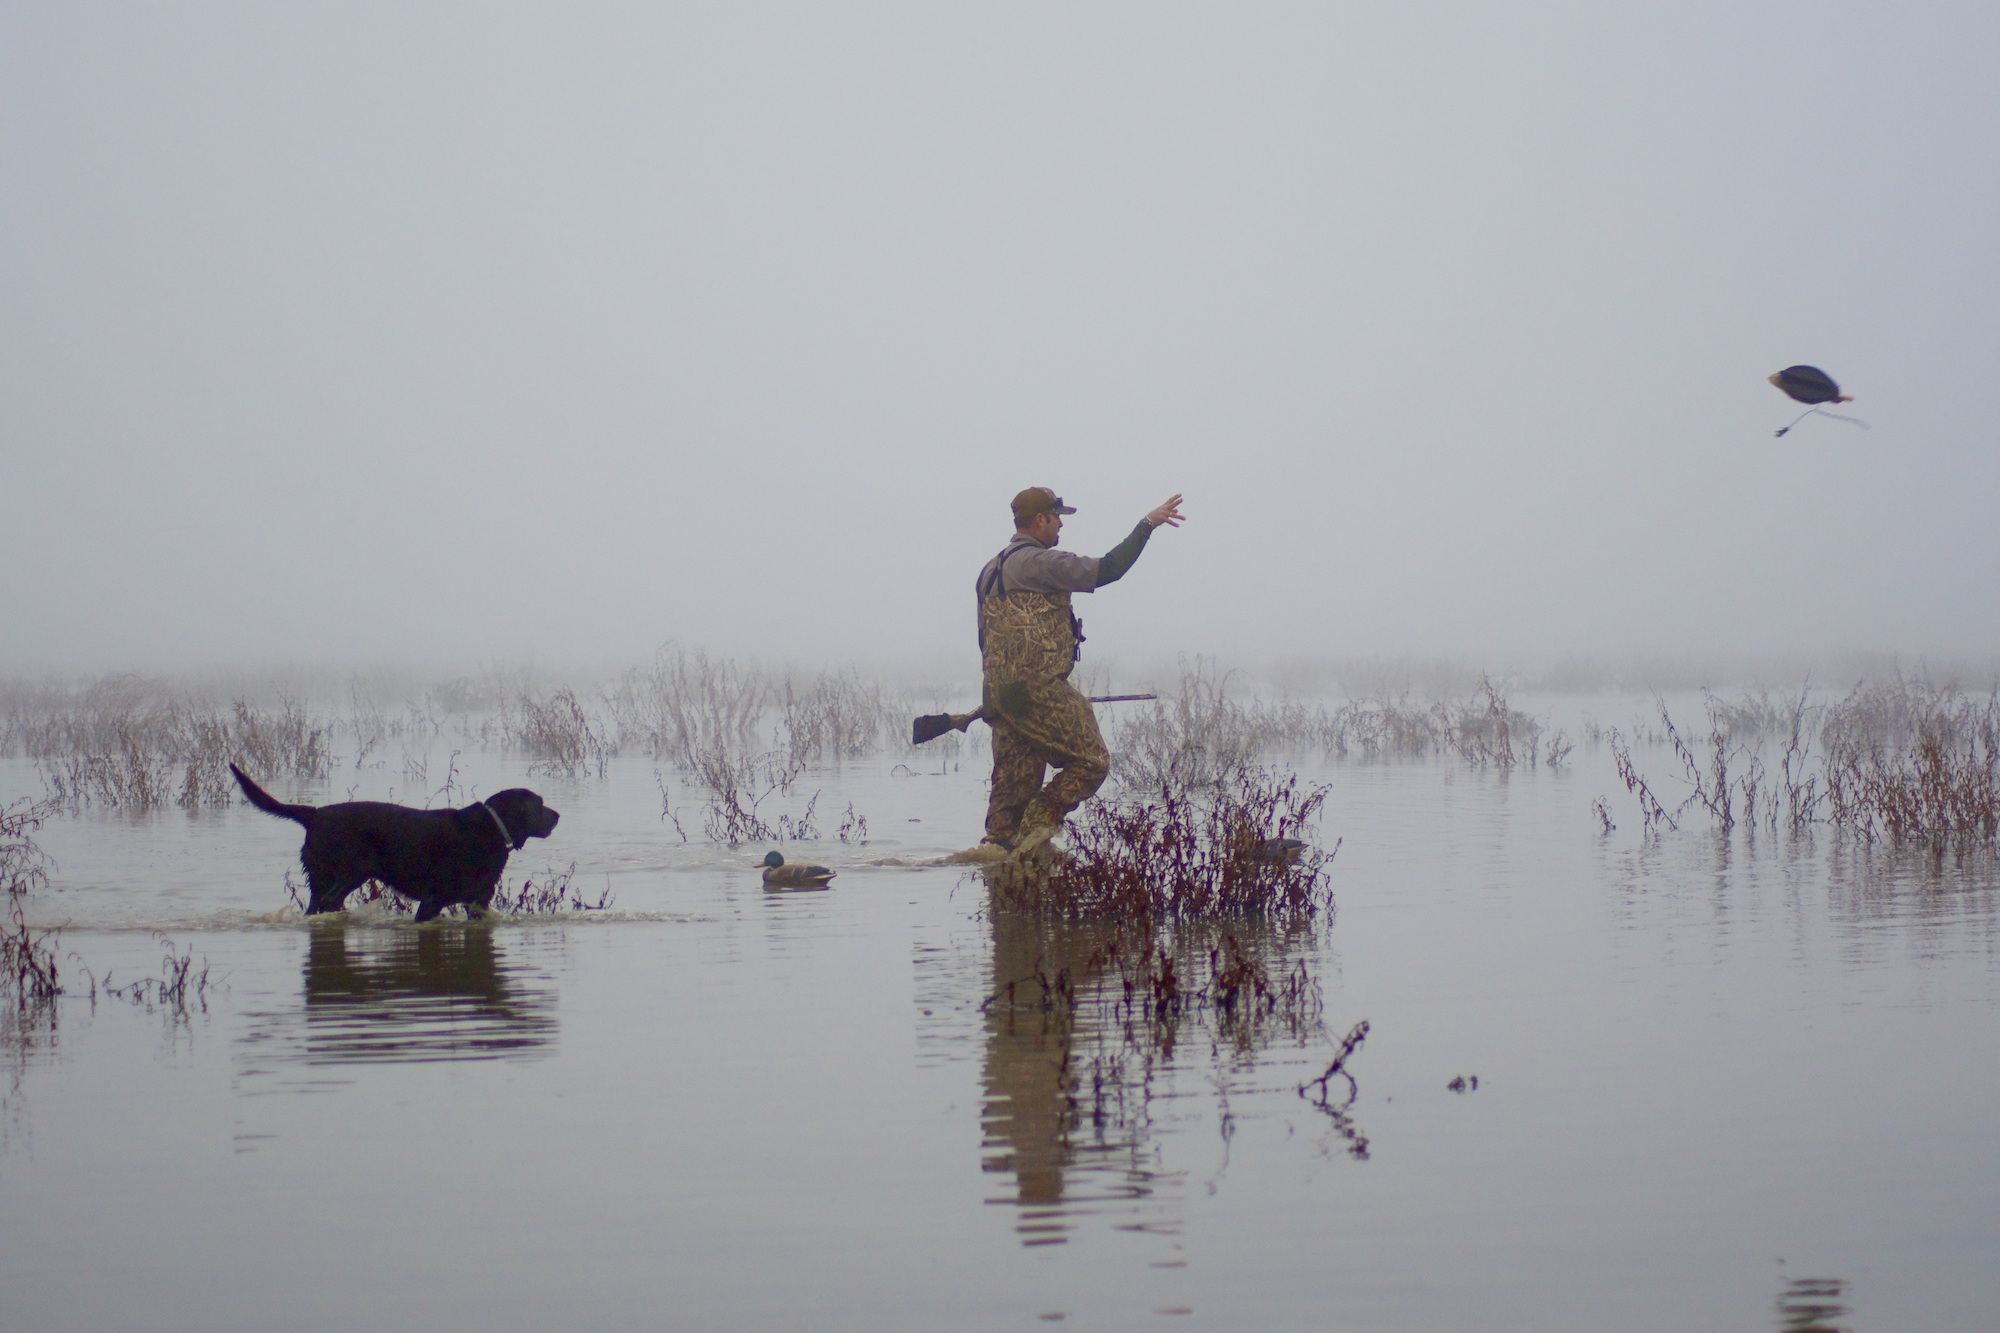 A man walking through shallow water in one of the best duck hunting waters with a black dog